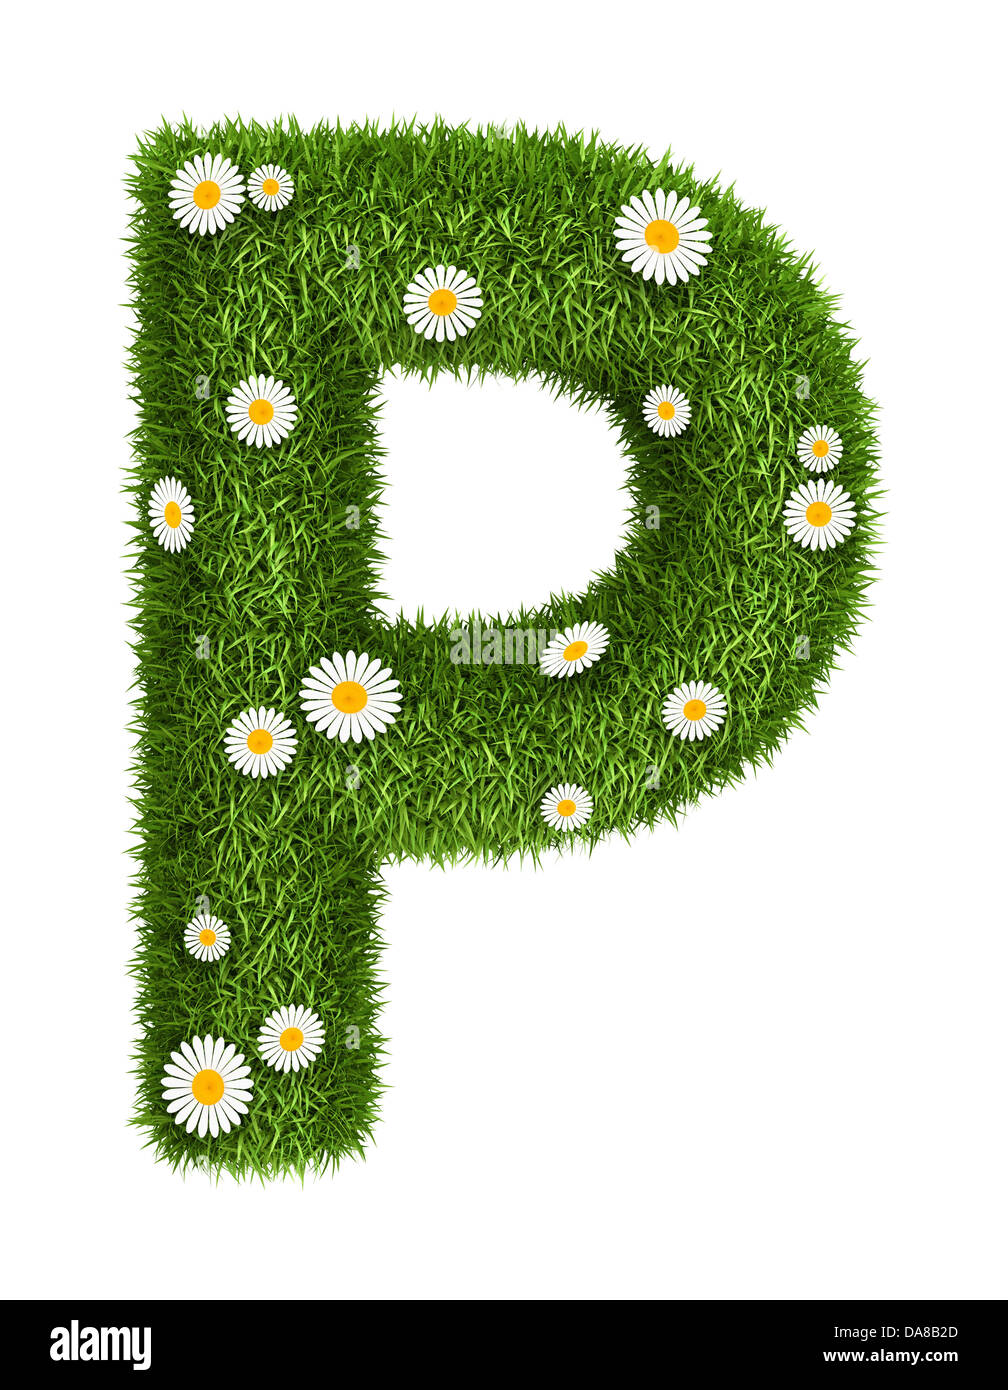 Natural grass letter P Stock Photo